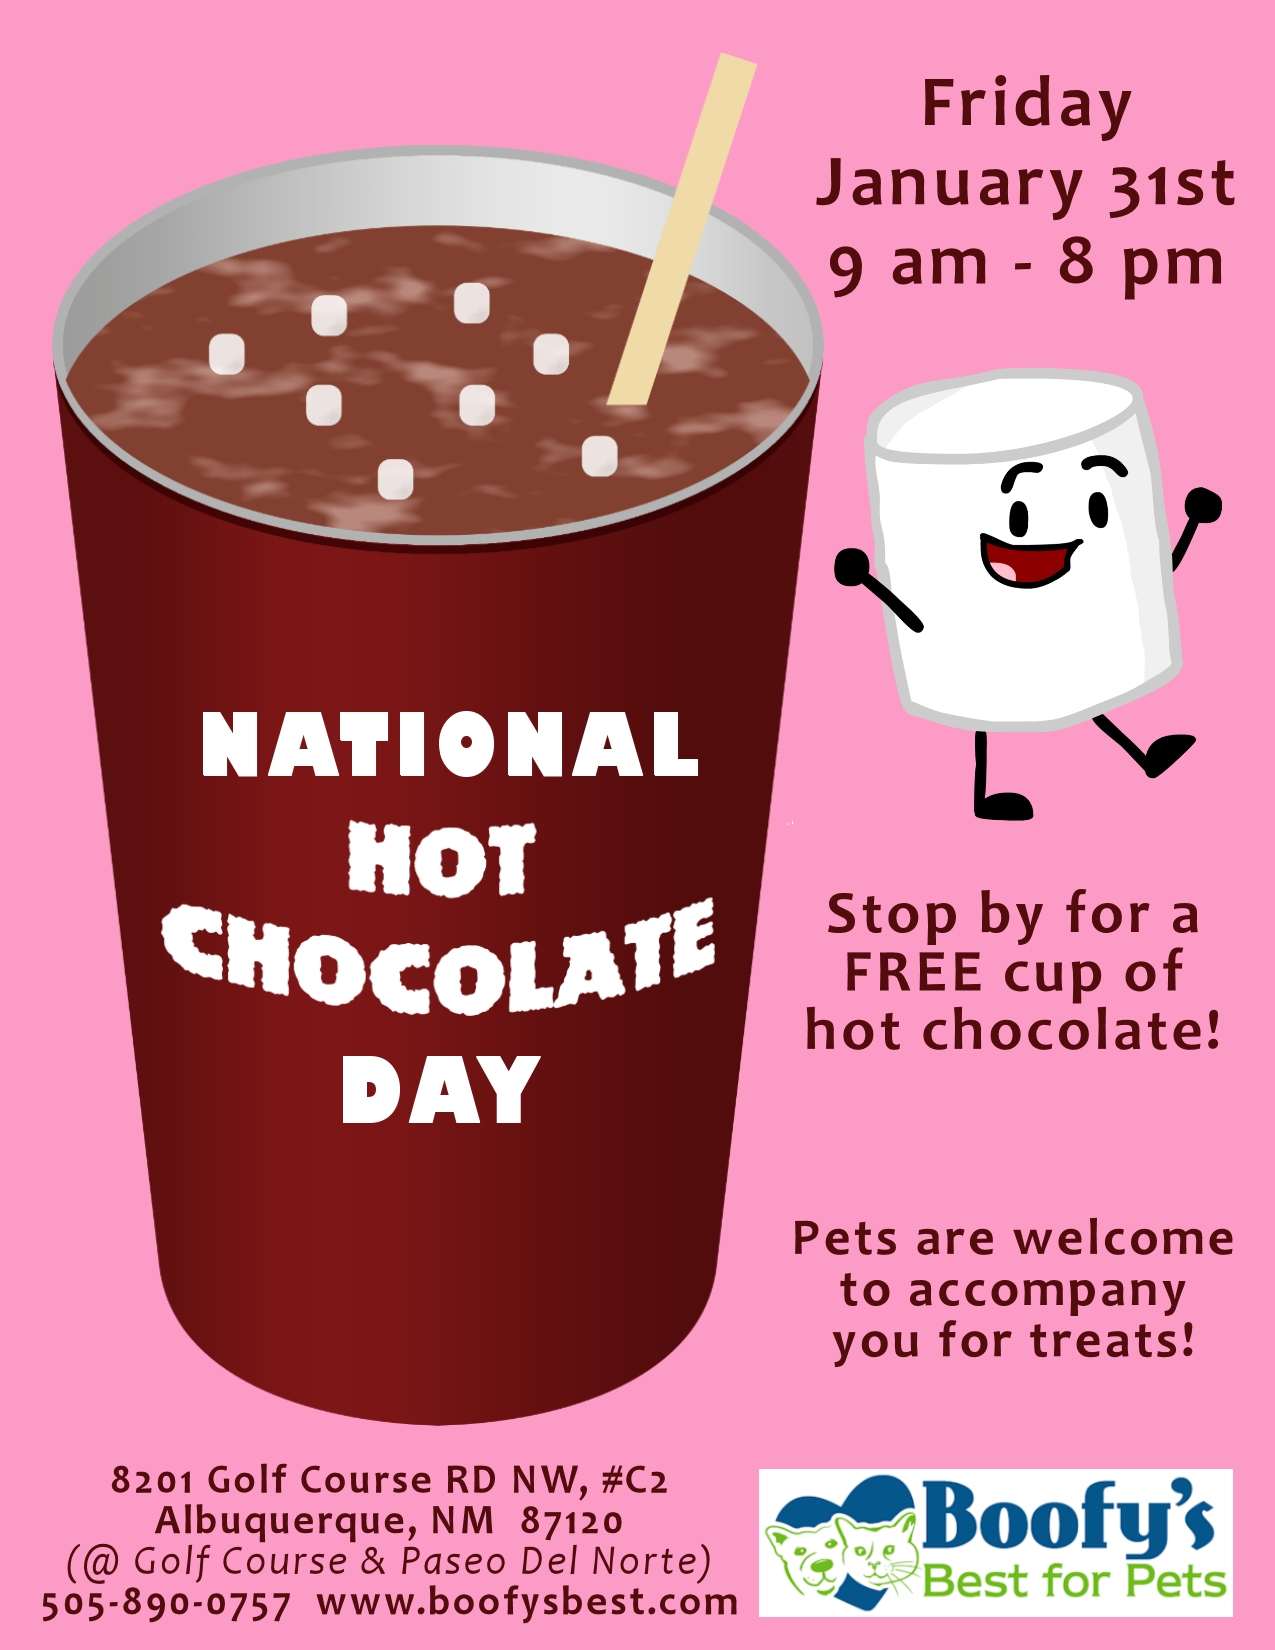 national-hot-chocolate-day-at-boofy-s-boofy-s-best-for-pets